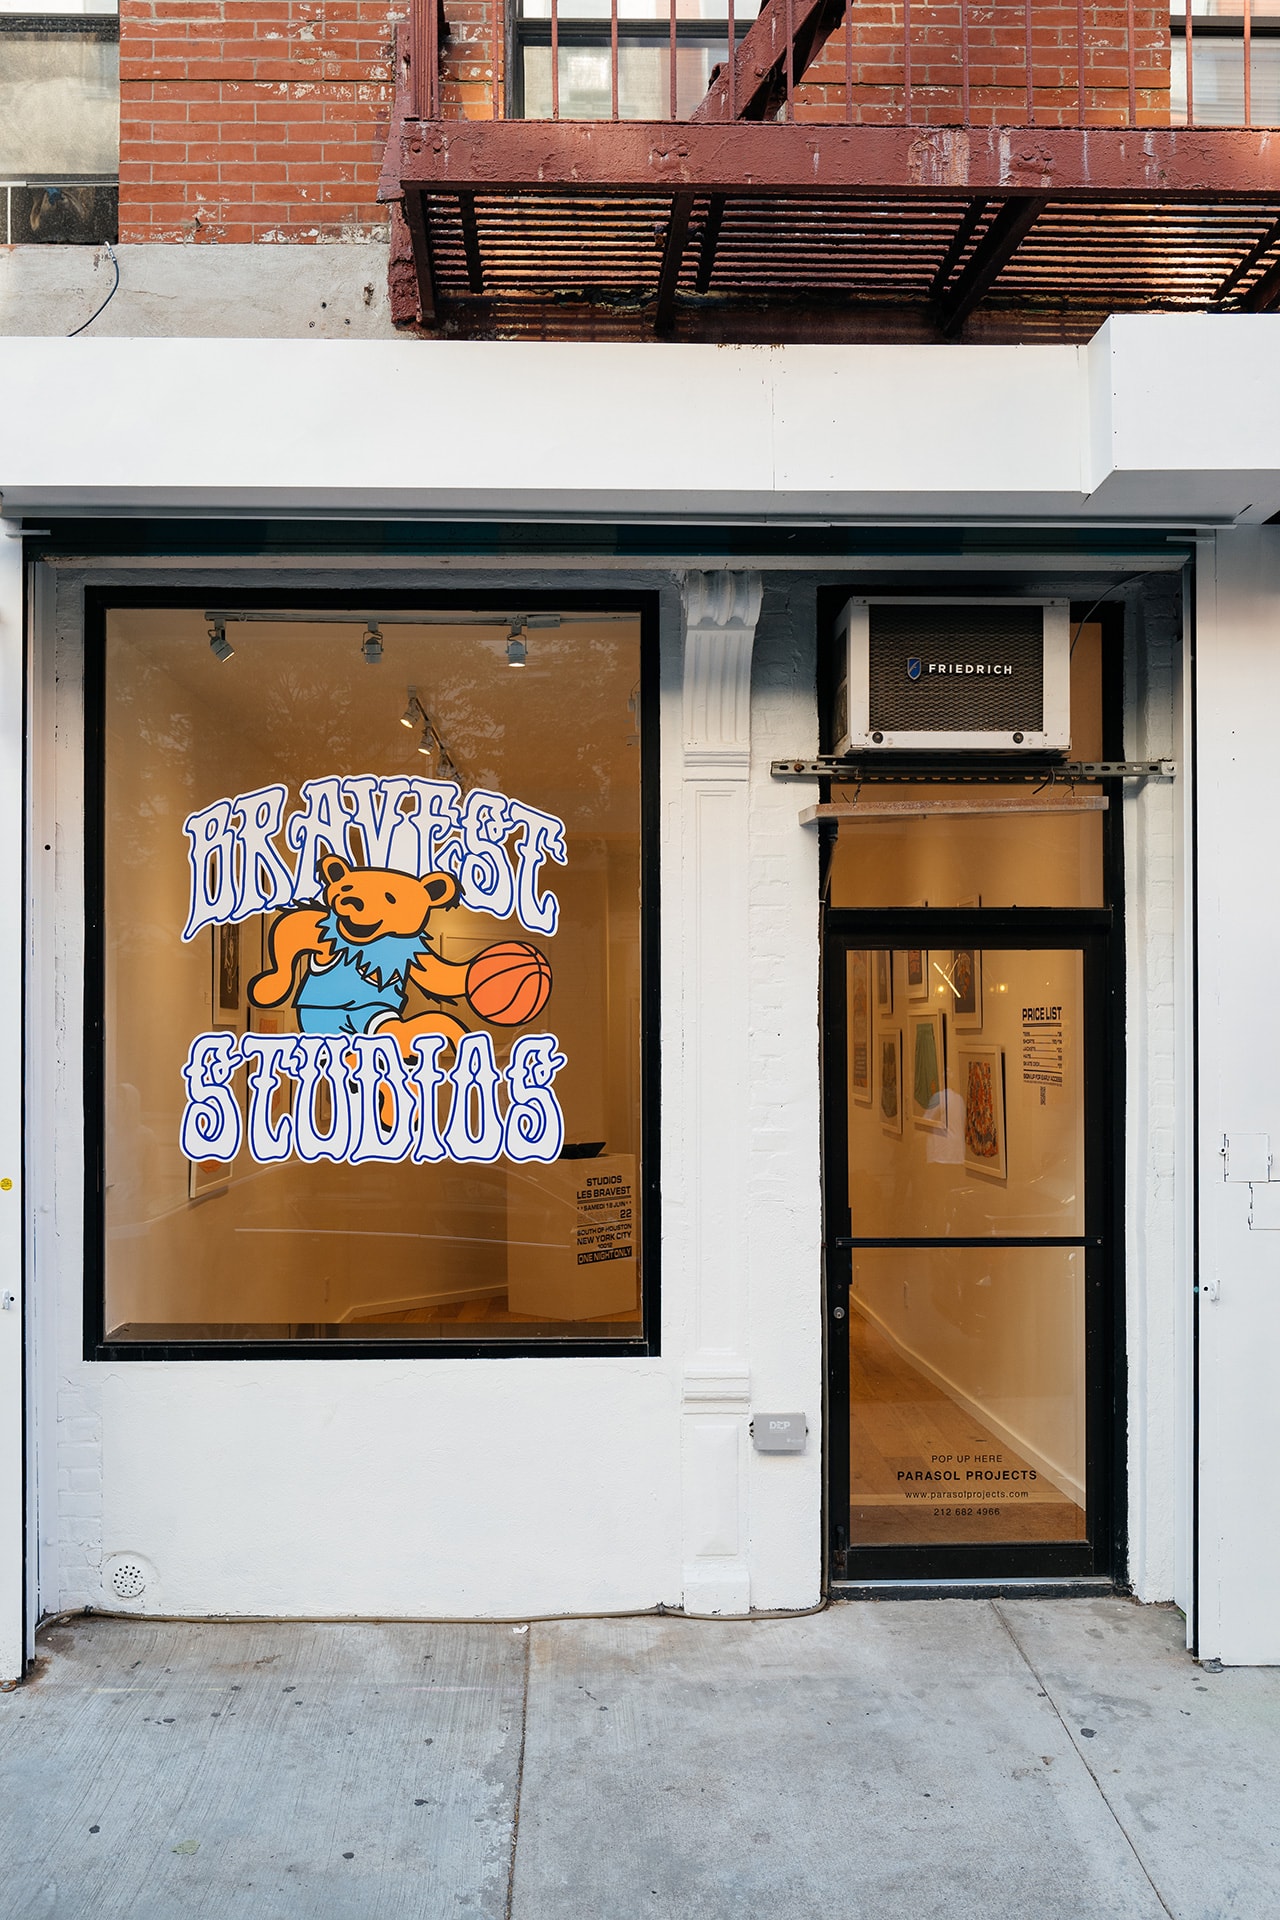 Bravest Studios Returns To SoHo With A Scintillating Summer Pop-up